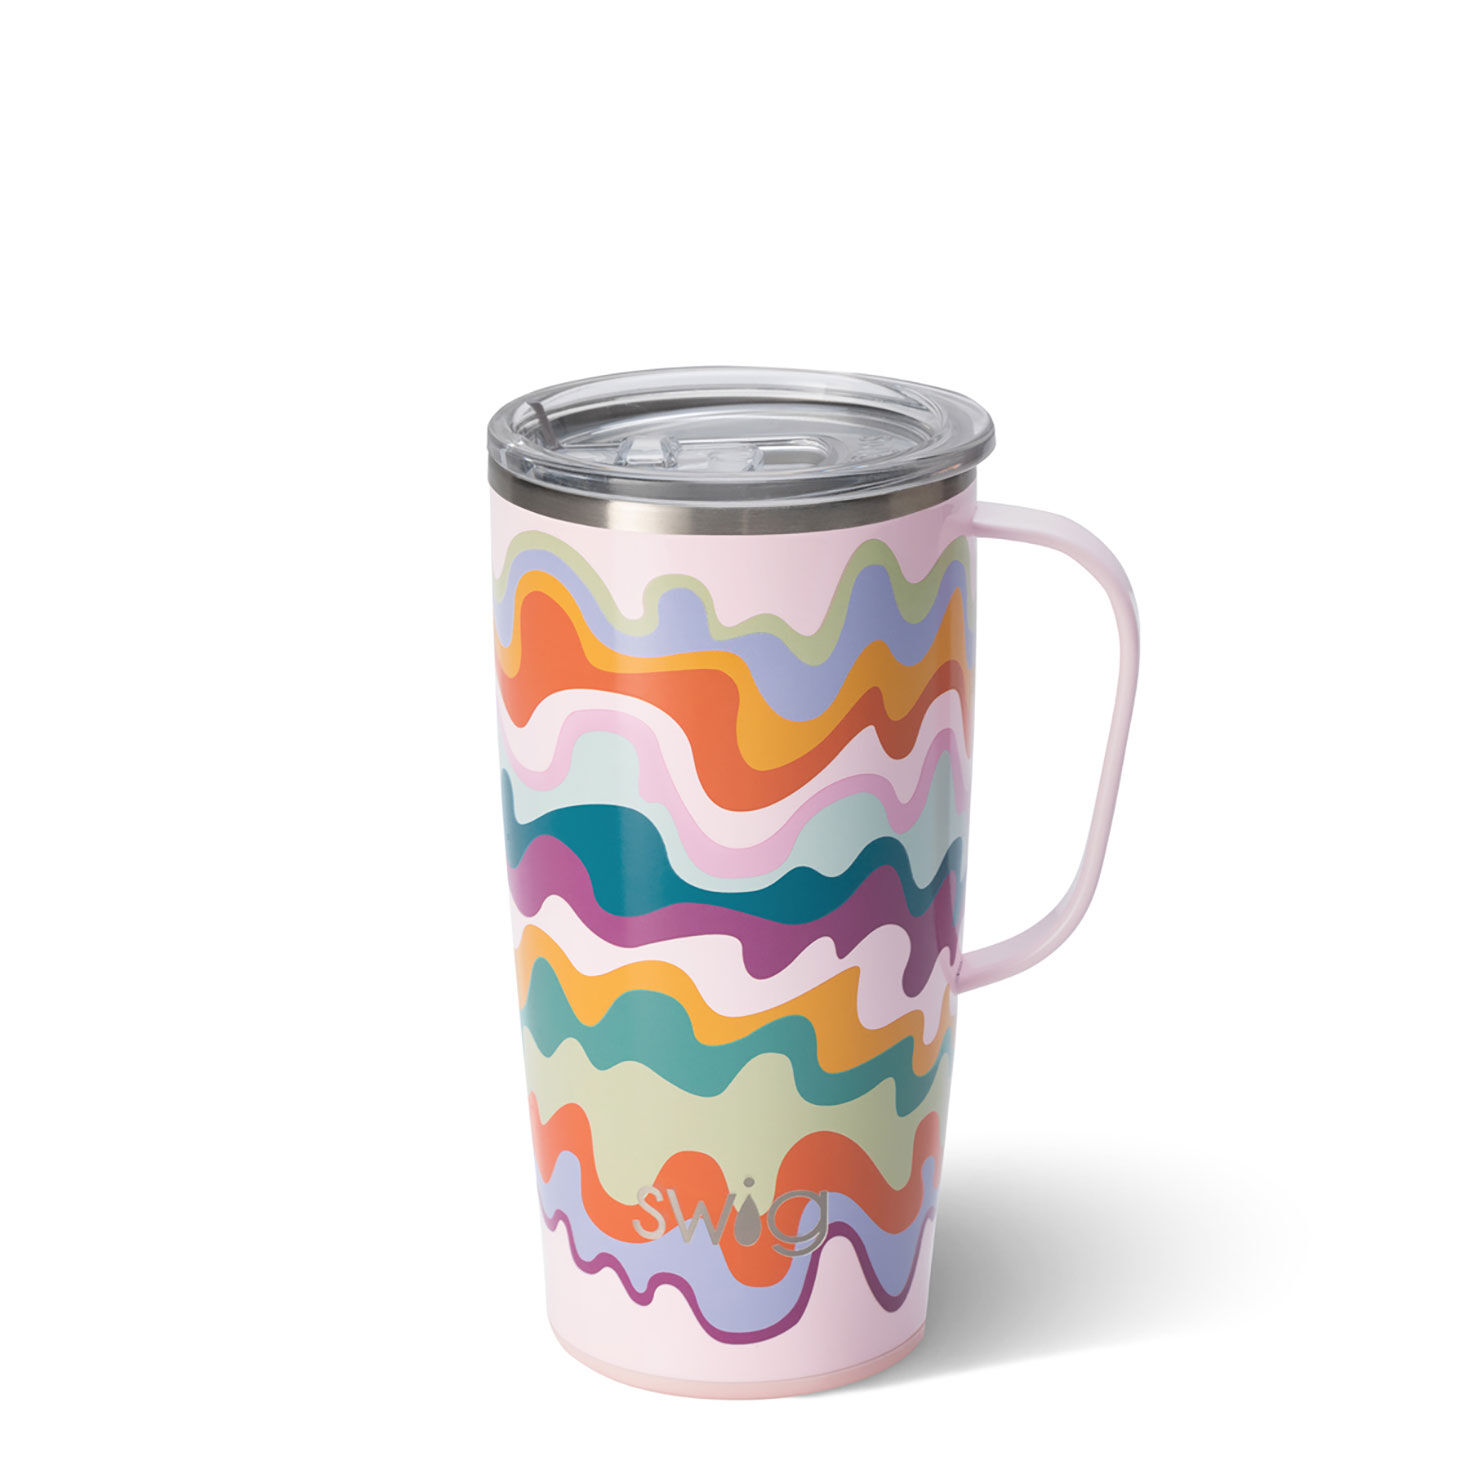 https://www.hallmark.com/dw/image/v2/AALB_PRD/on/demandware.static/-/Sites-hallmark-master/default/dw88d49502/images/finished-goods/products/S102M22SA/Colored-Wave-Design-Insulated-Mug-With-Lid_S102M22SA_01.jpg?sfrm=jpg